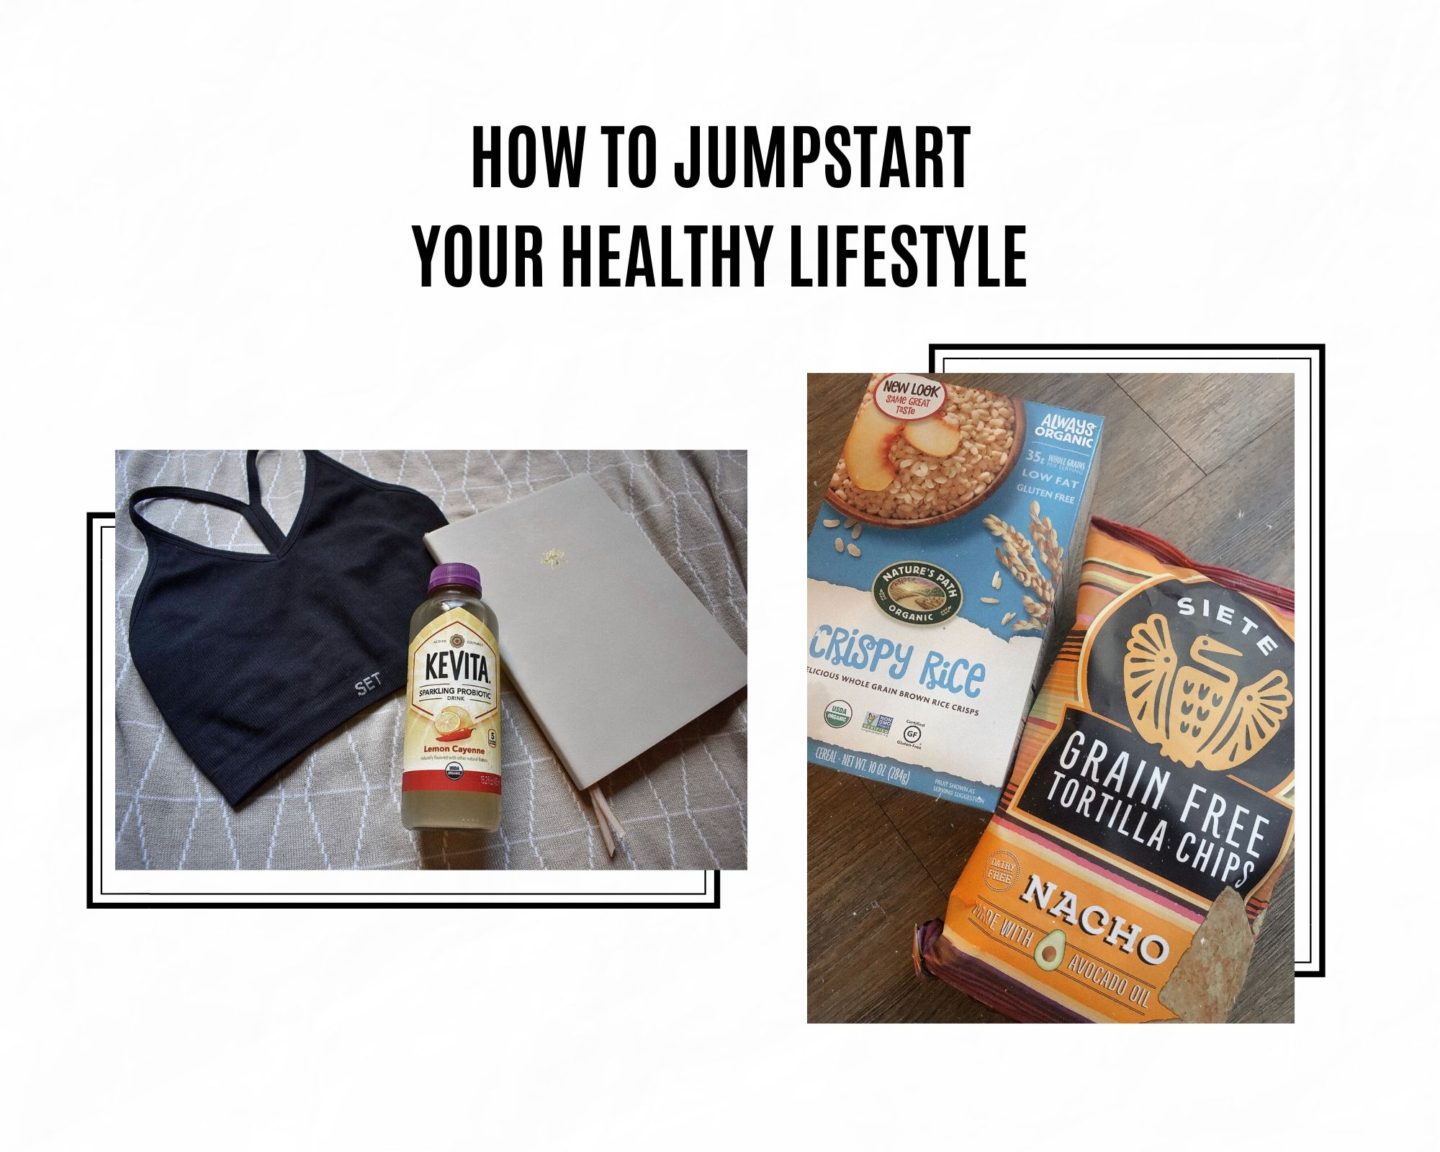 How to Jumpstart Your Healthy Lifestyle